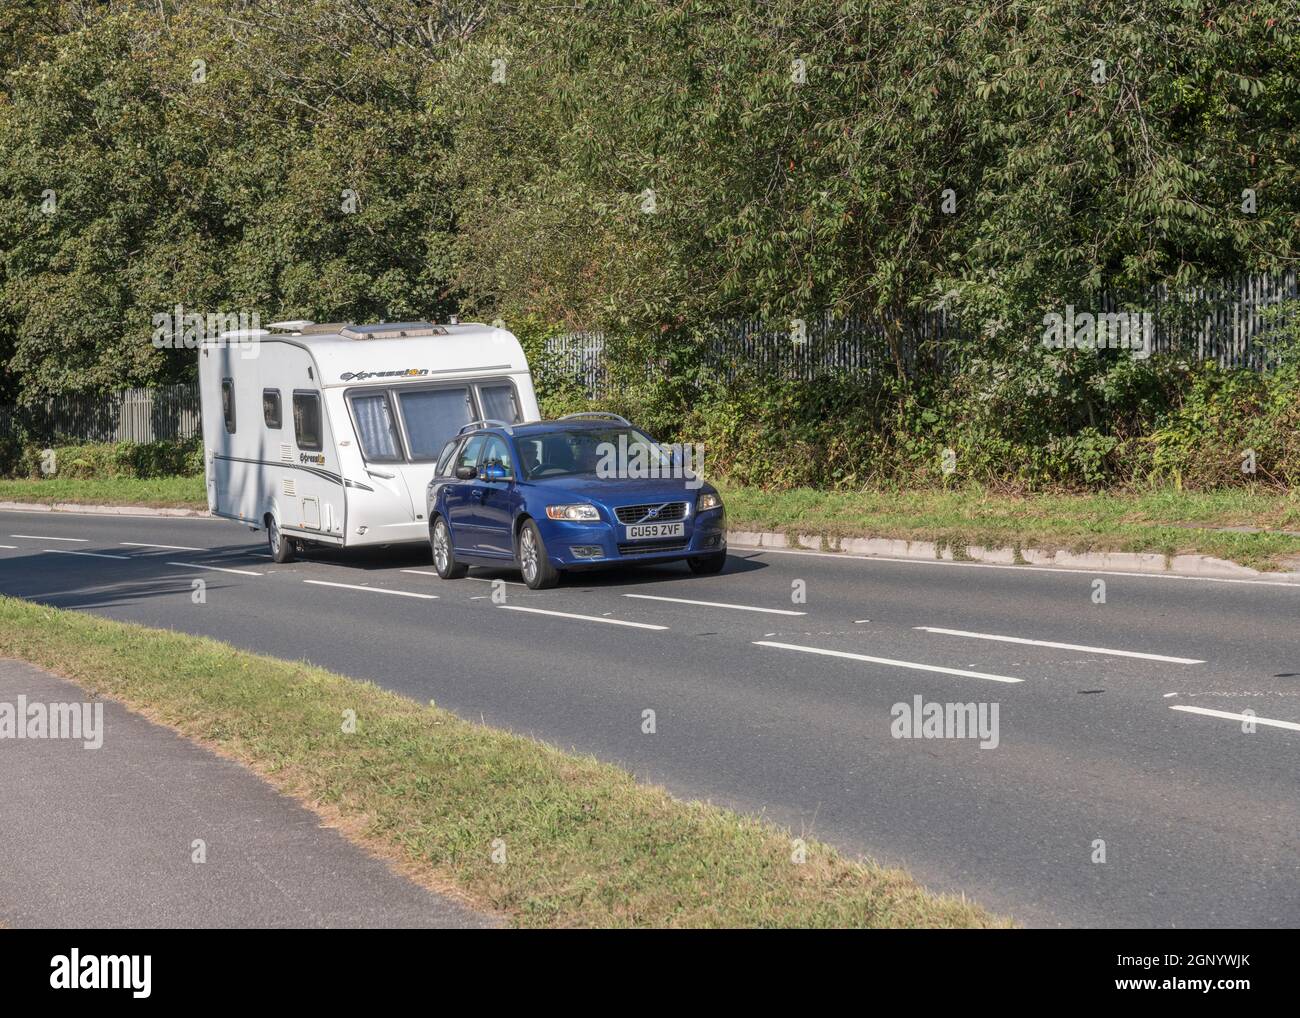 Blue Volvo car towing Expression 540 caravan travelling uphill on country road in Cornwall. For UK caravans, staycations in UK, alternative holidays. Stock Photo